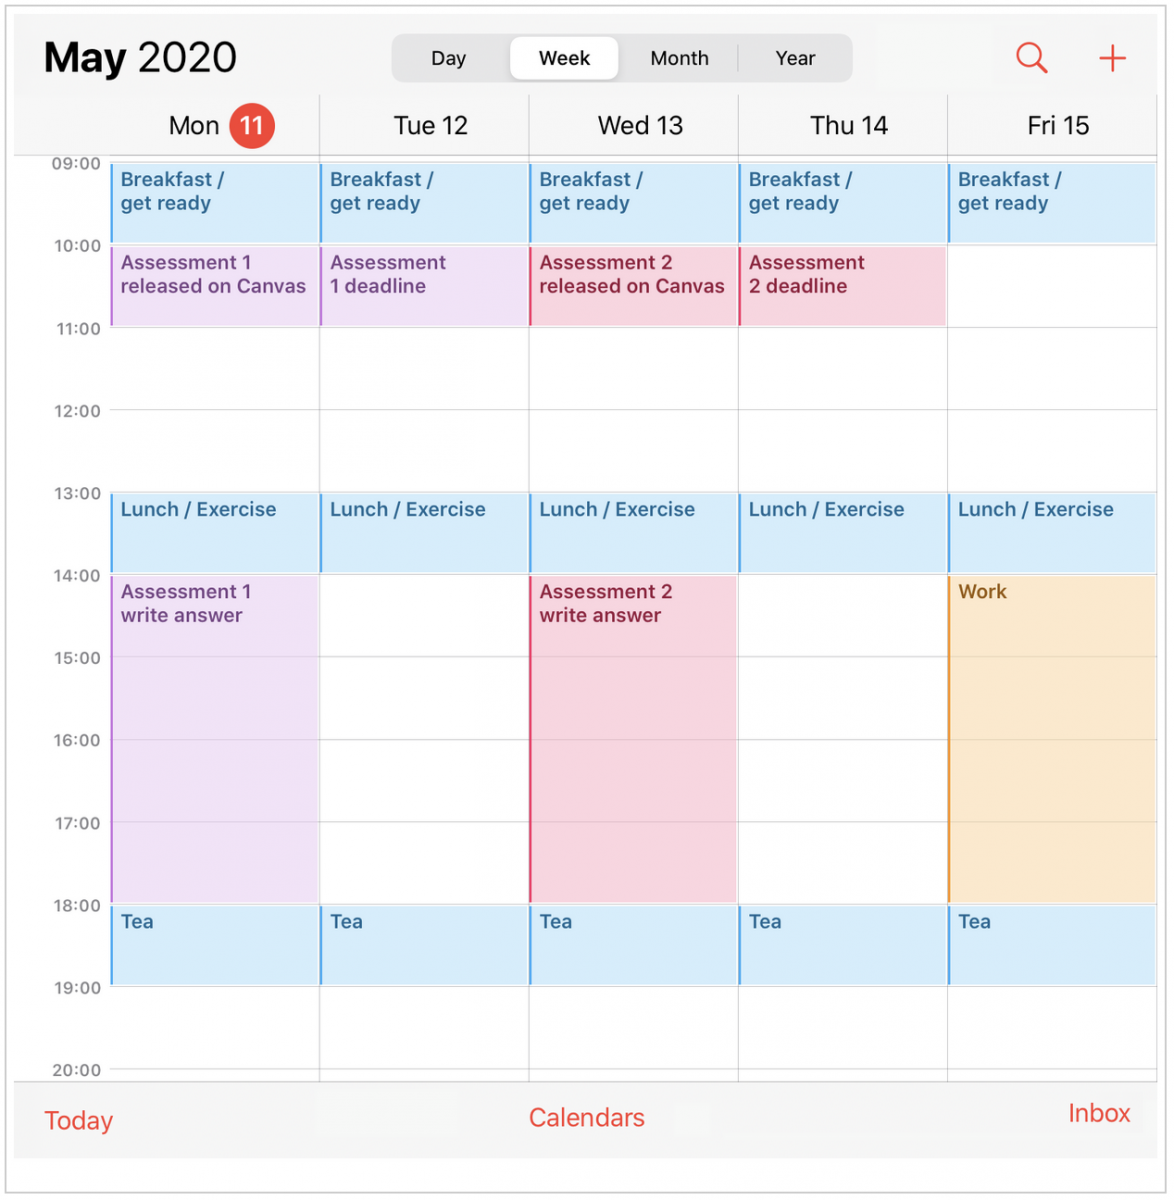 An image of a 2020 calendar with timings on for writing the assessment added